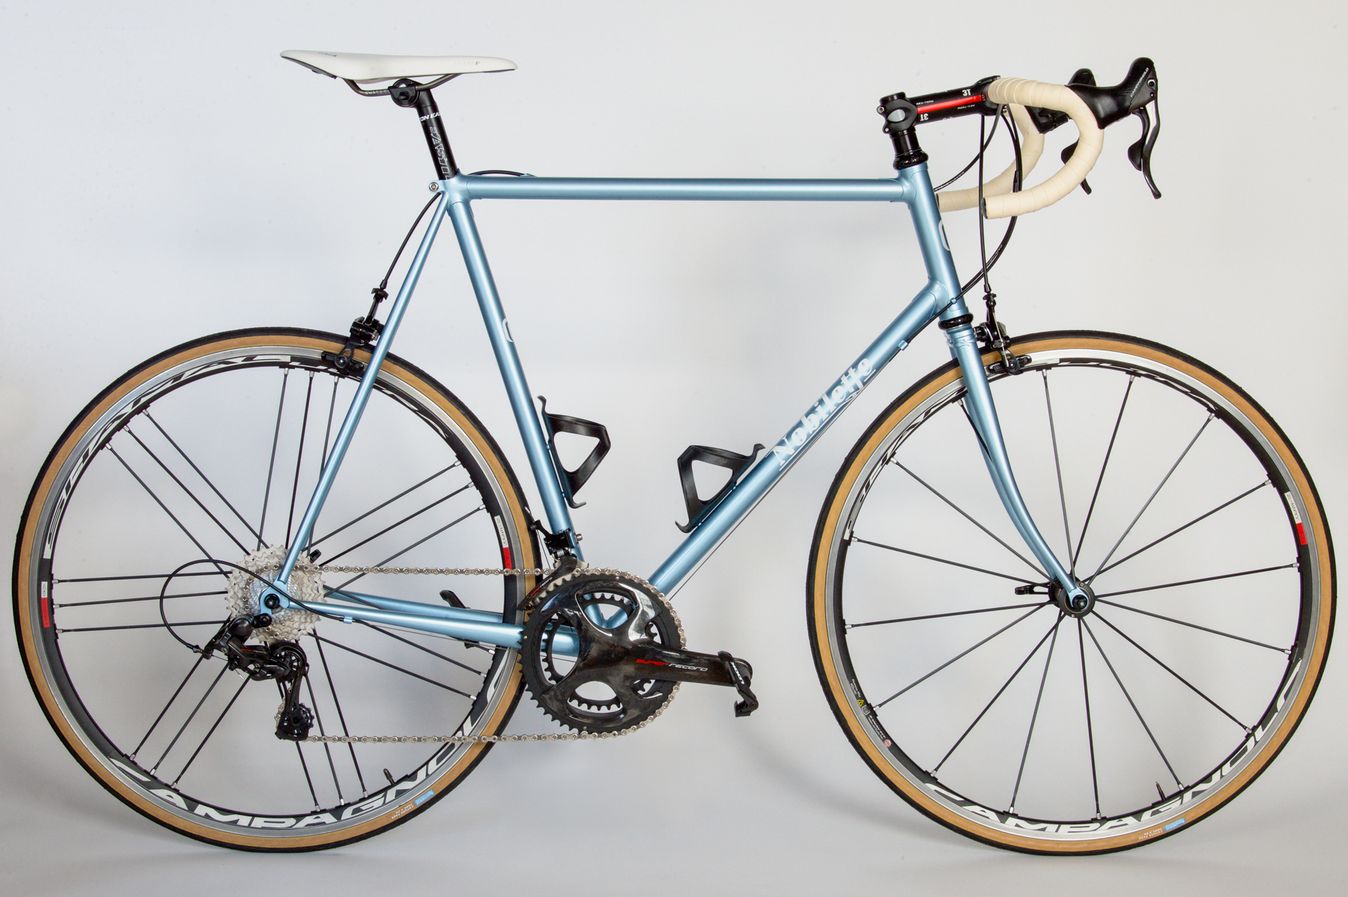 This custom Nobilette has a steel frame and is partnered with a Campagnolo groupset. It gets a 'Supernice' from us